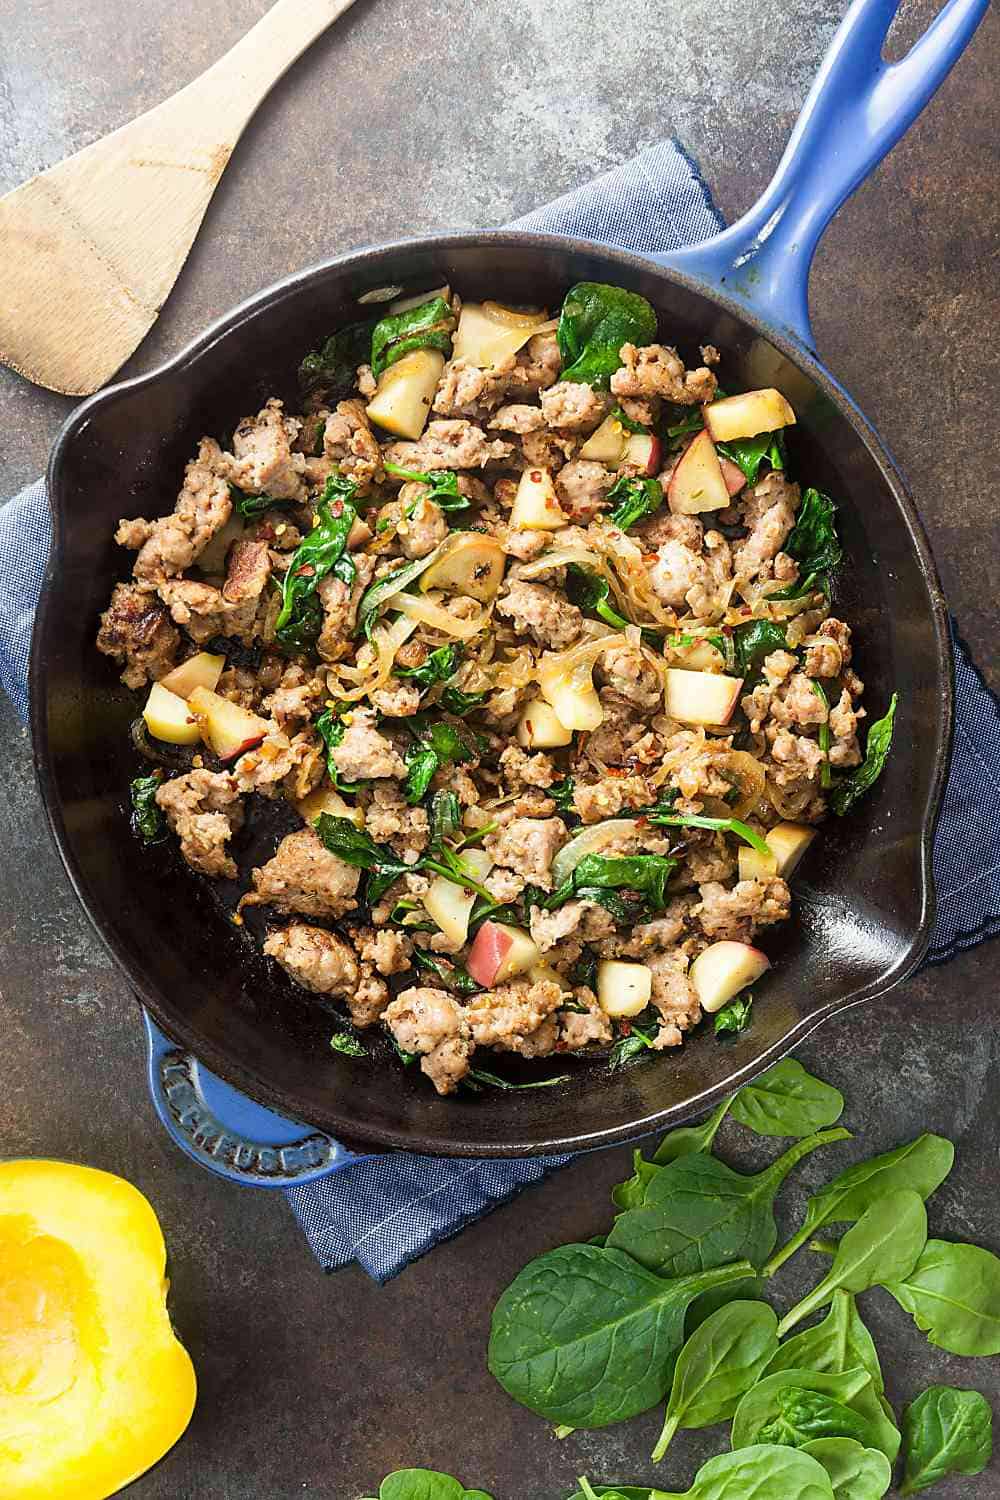 The filling for sausage stuffed acorn squash is made with sausage, spinach, apples, and caramelized onions